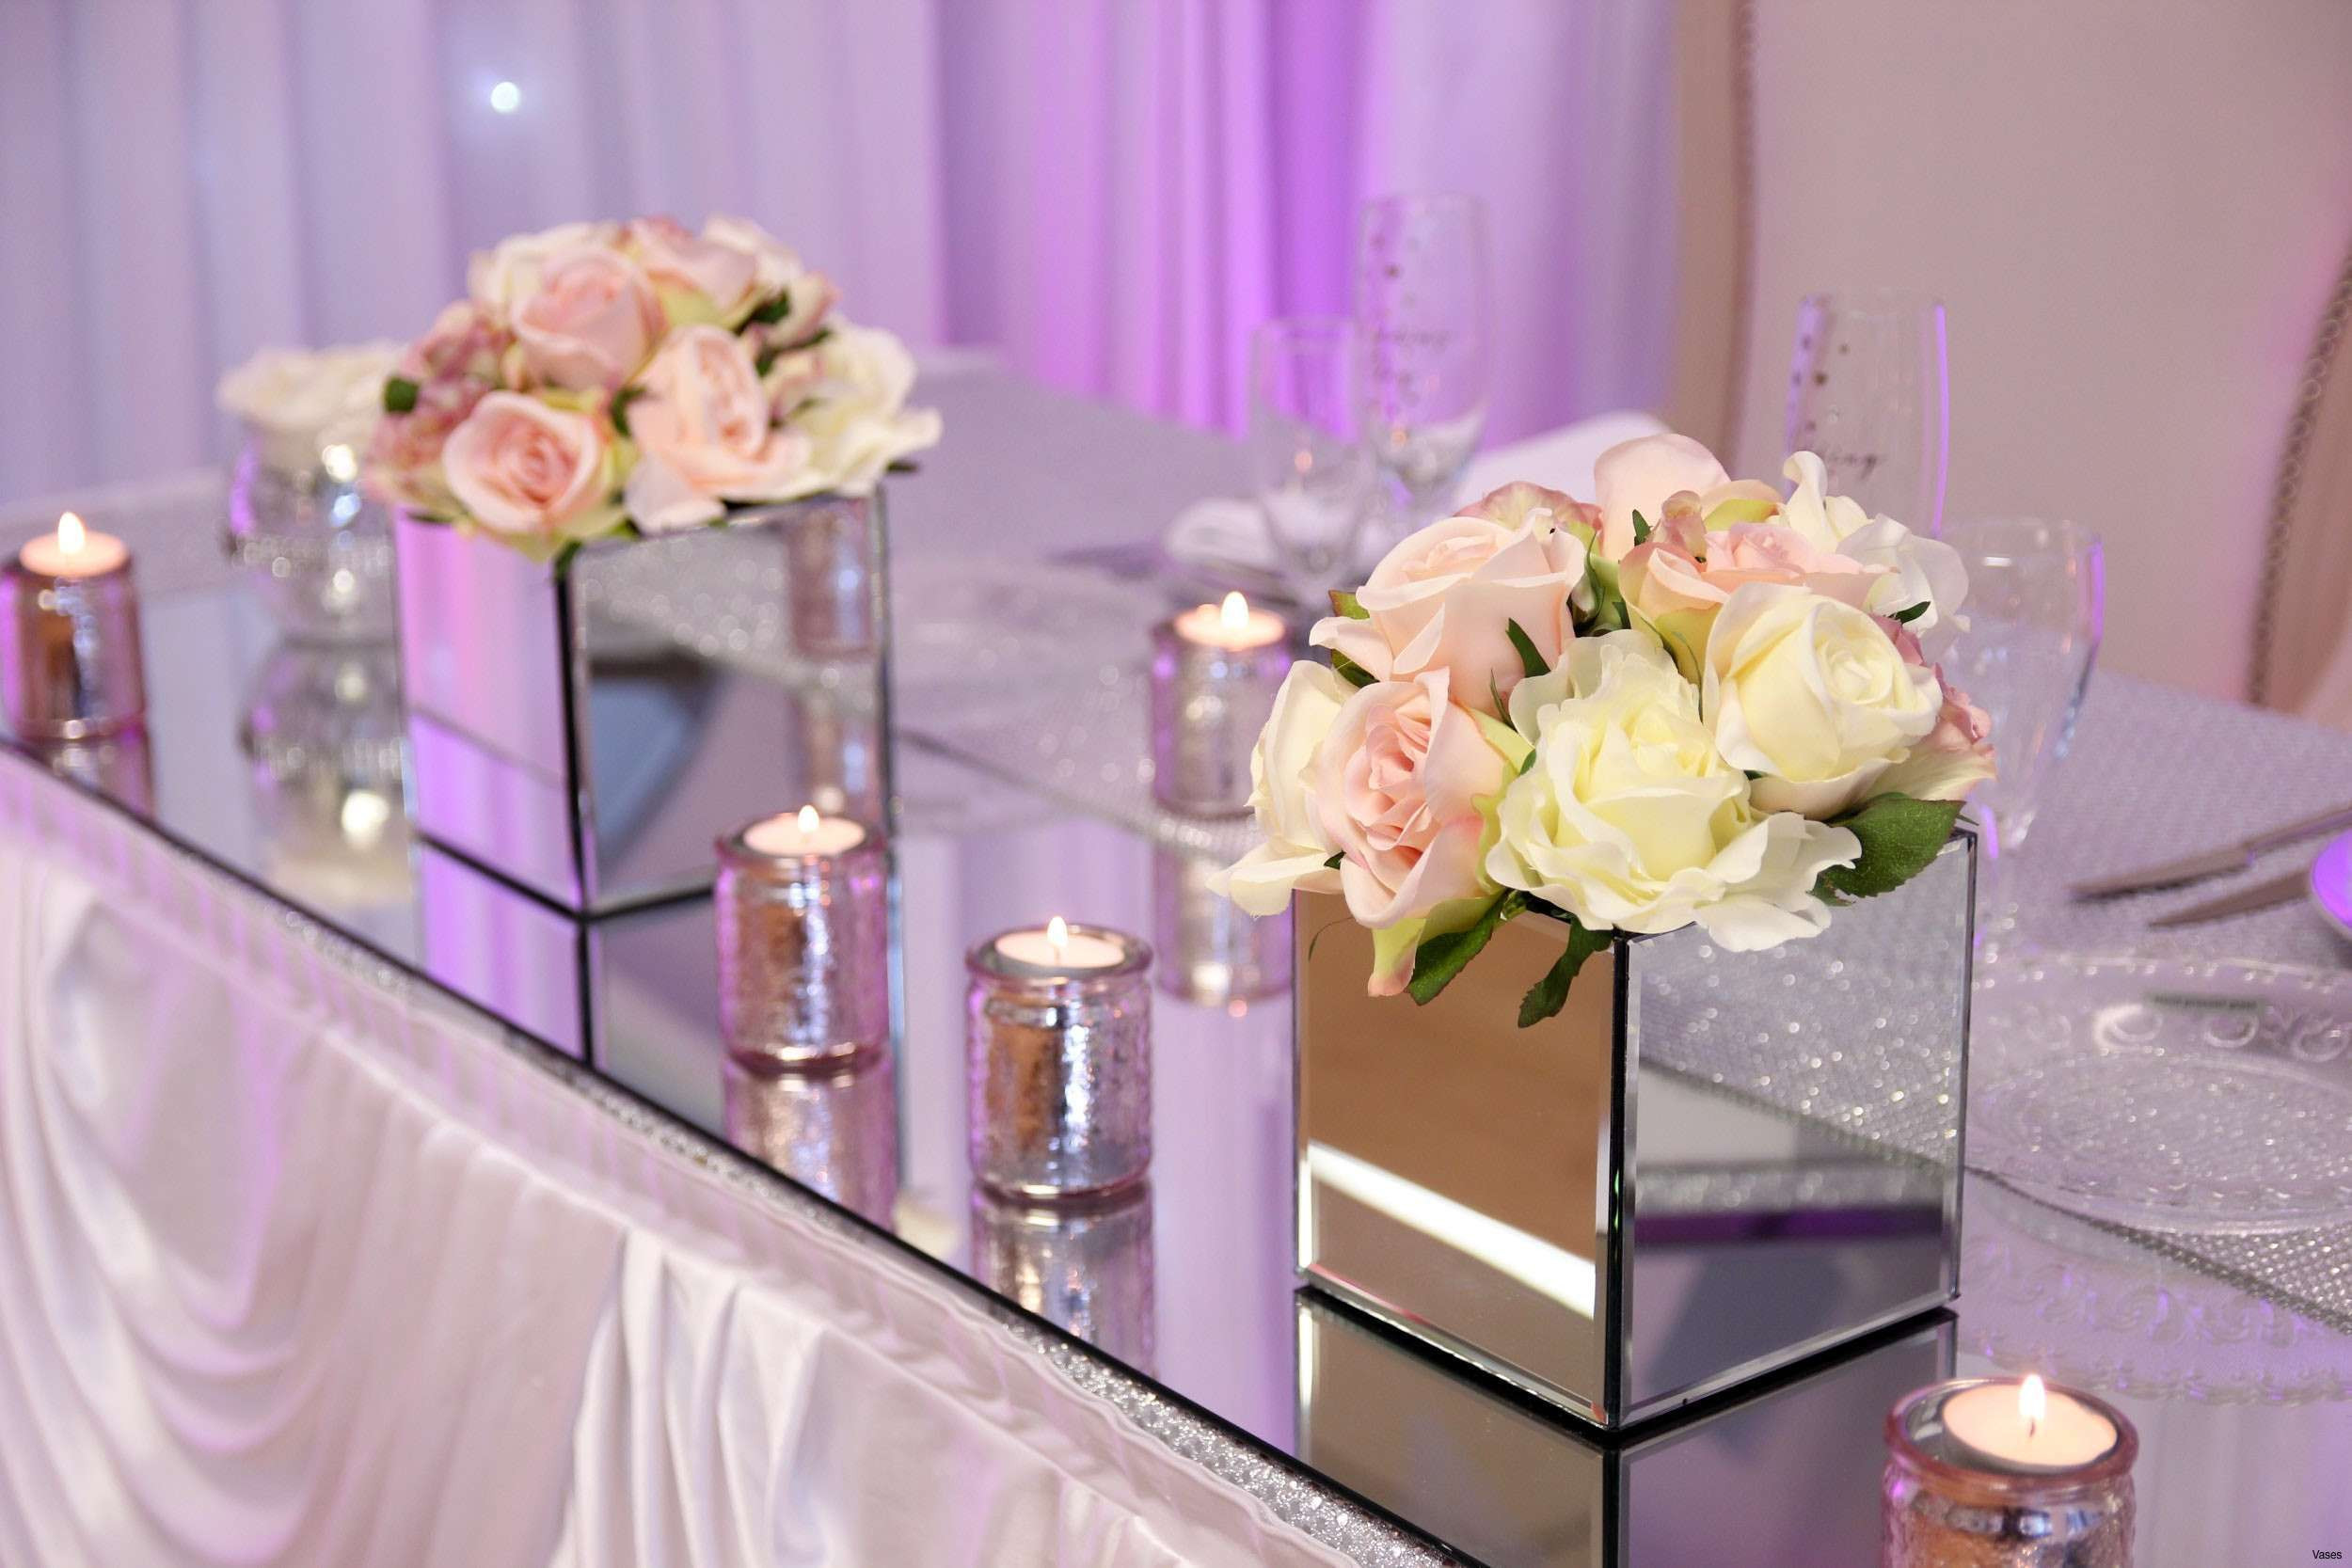 28 Cute Flower Arrangement In Vase 2024 free download flower arrangement in vase of 26 luxury wedding centerpieces ideas sokitchenlv with wedding centerpieces ideas lovely mirrored square vase 3h vases mirror table decorationi 0d weddings of 26